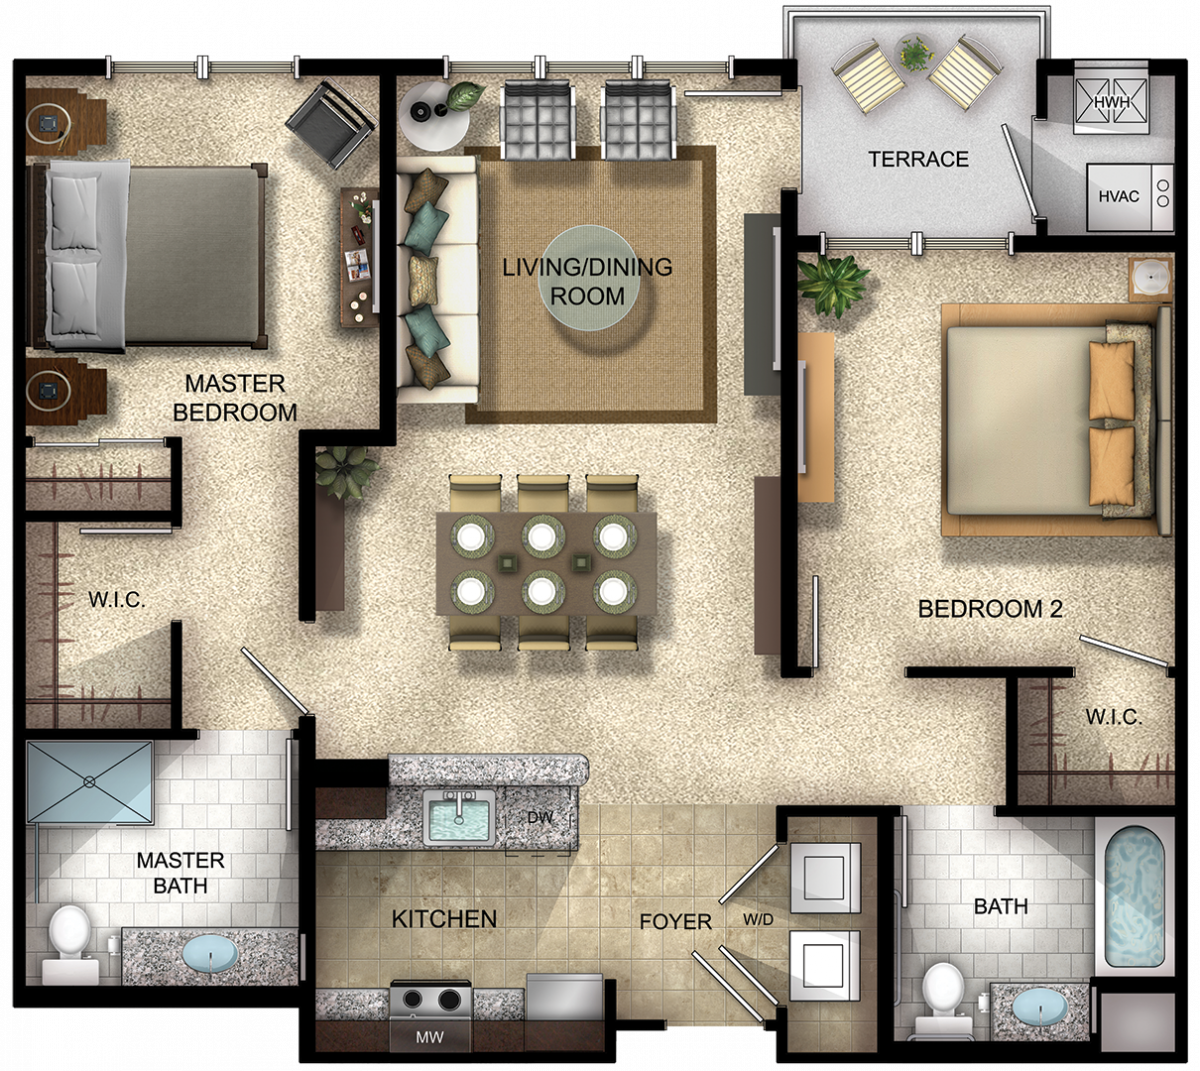 Floor plan of a two bedroom apartment with in-suite bathroom and terrace in Secaucus